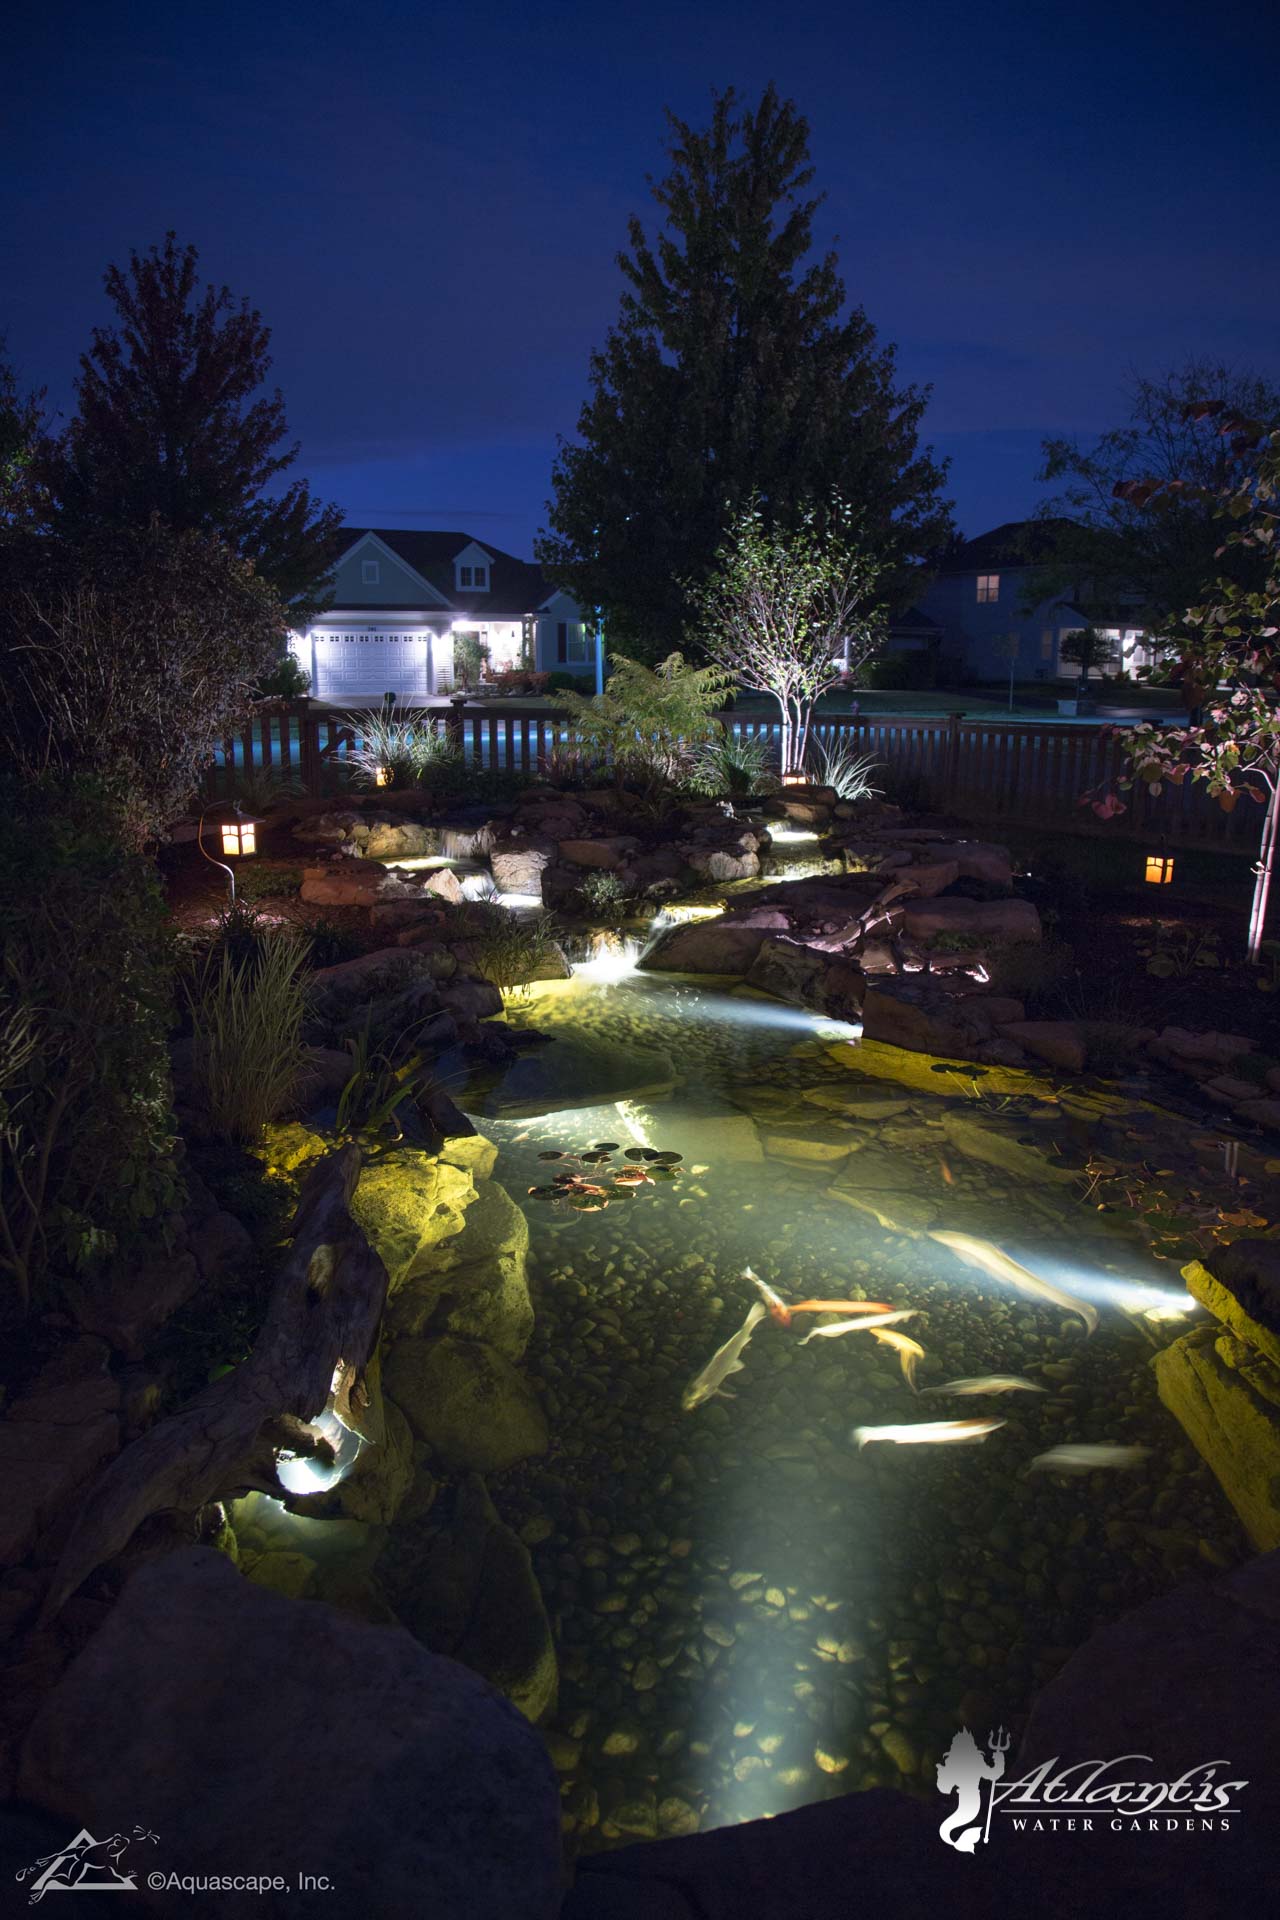 The Most Effective Tips for Koi Pond Maintenance